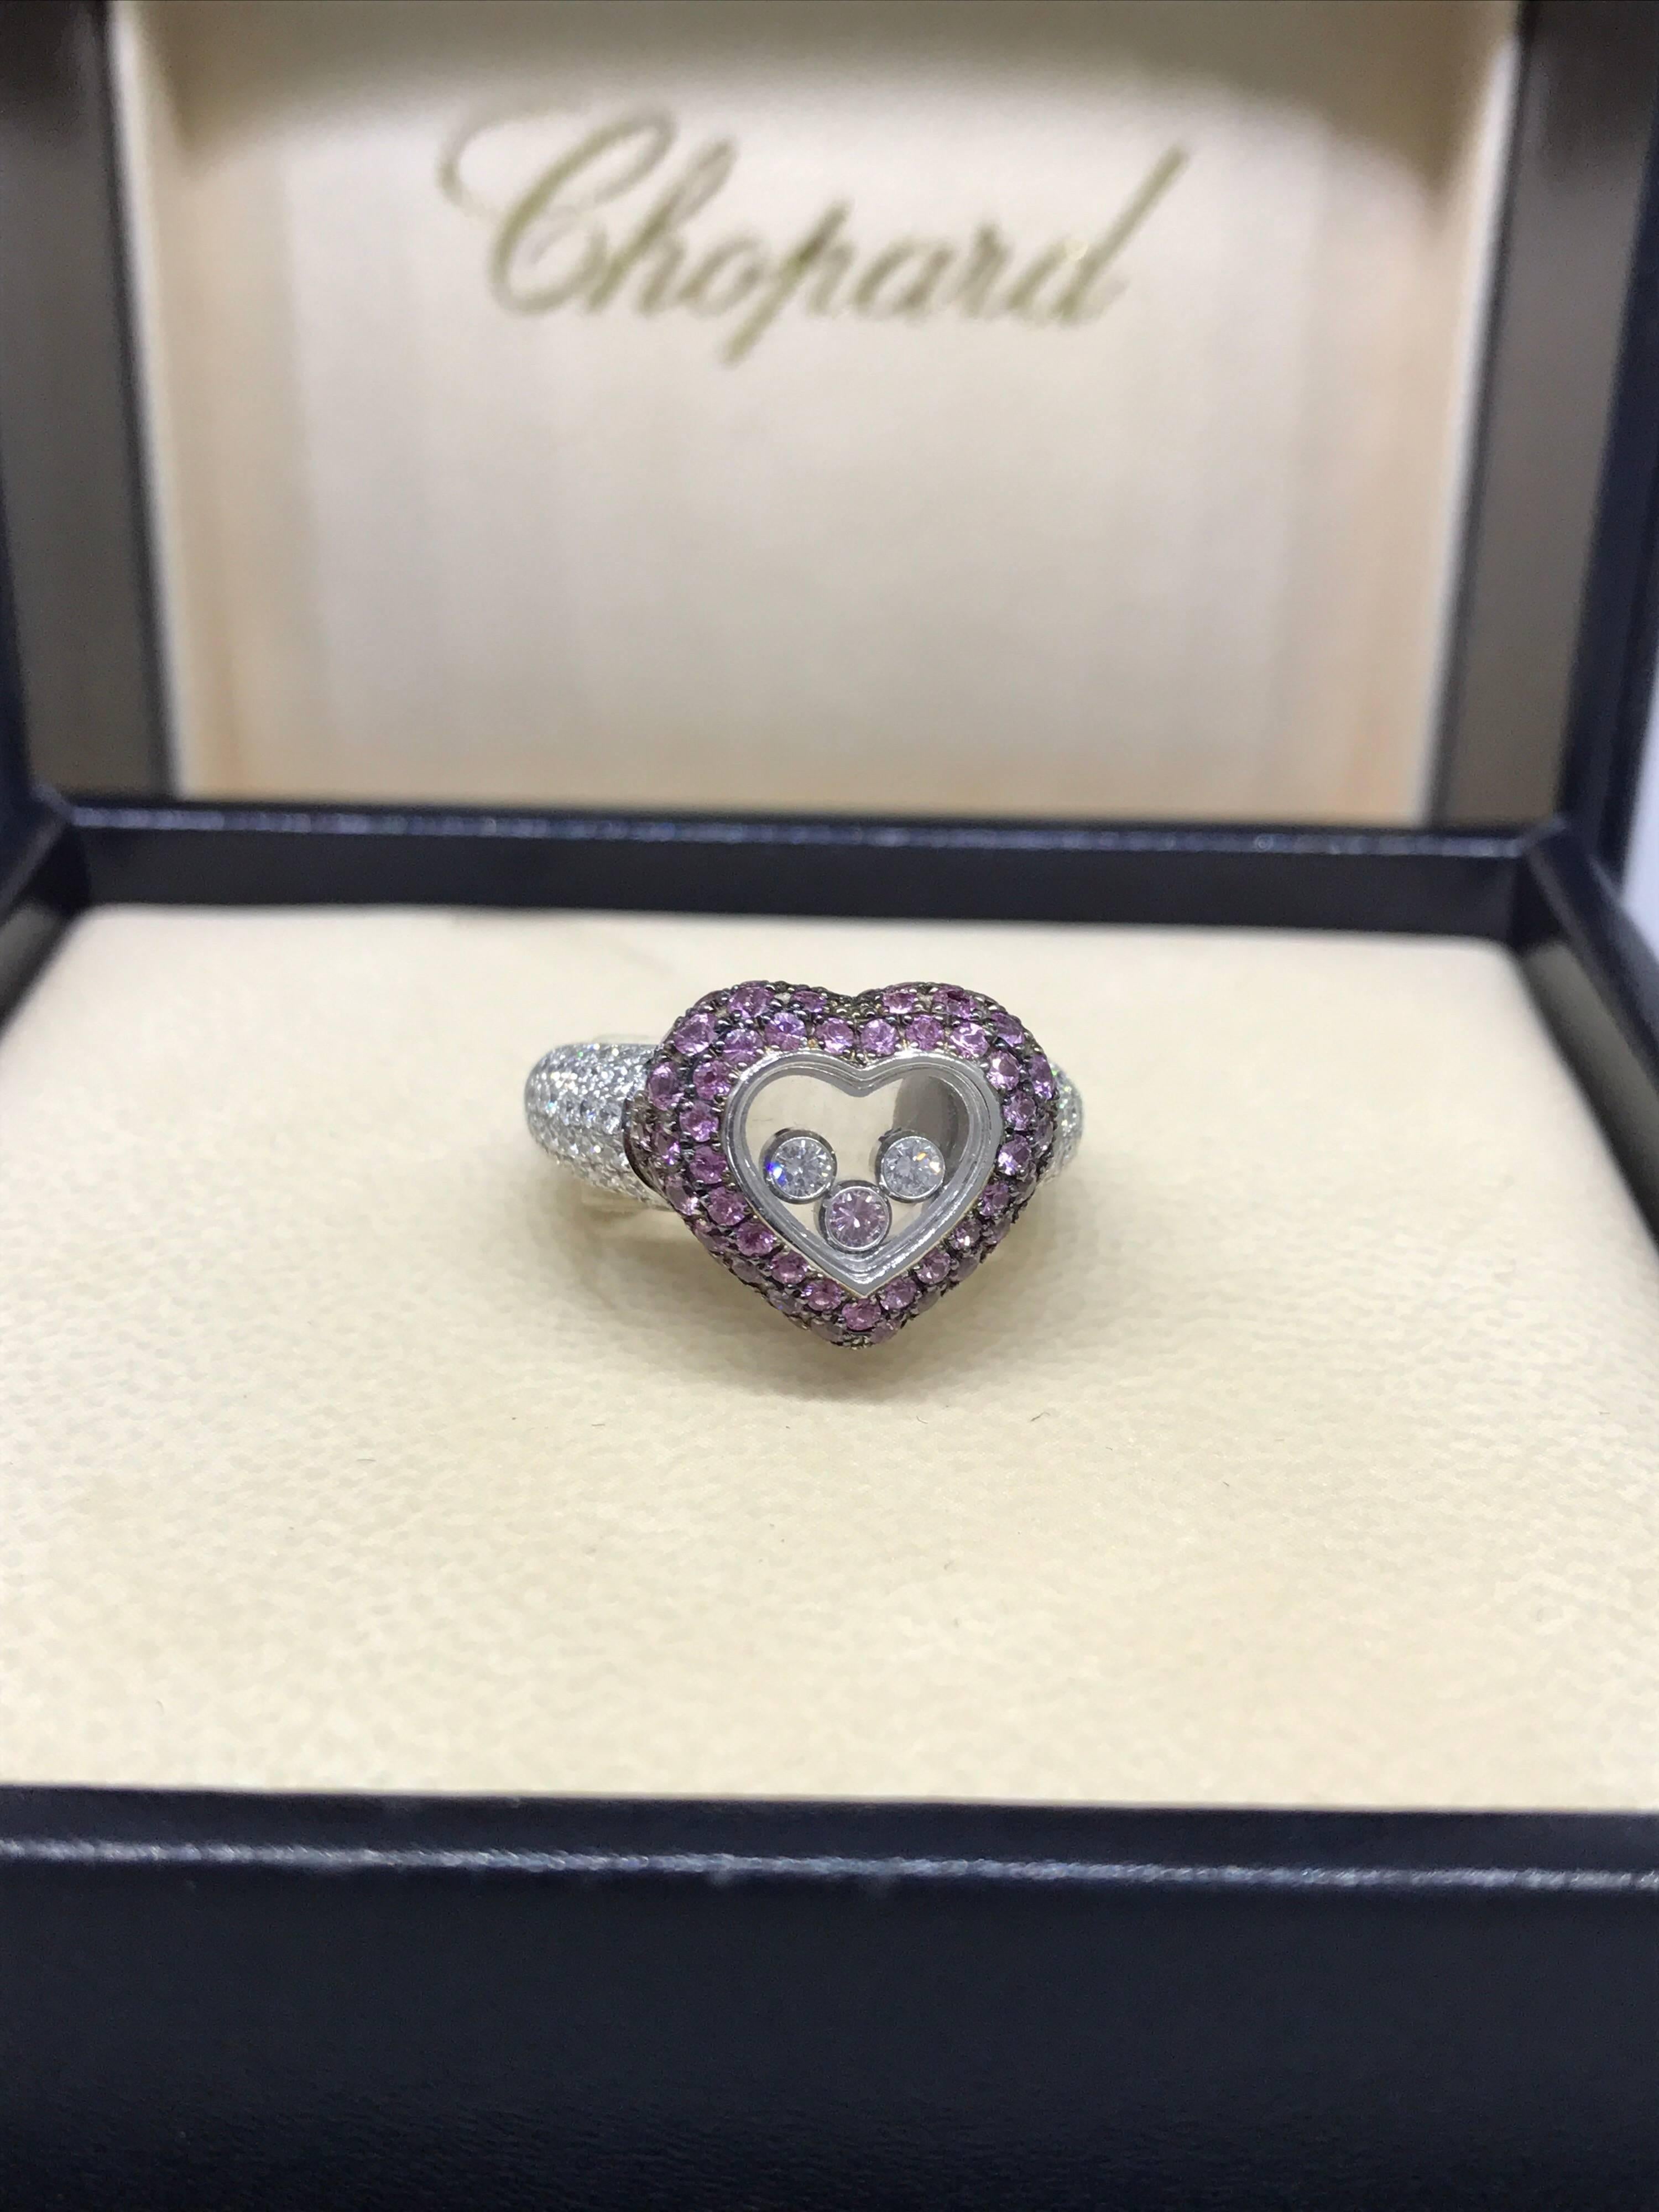 Chopard Happy Diamonds heart Shape Ring

Model Number: 82/4315/11-20

100% Authentic

Brand new

Comes with original Chopard box, certificate of authenticity and warranty, and jewels manual

18 Karat White Gold

76 Diamonds on the band (.68